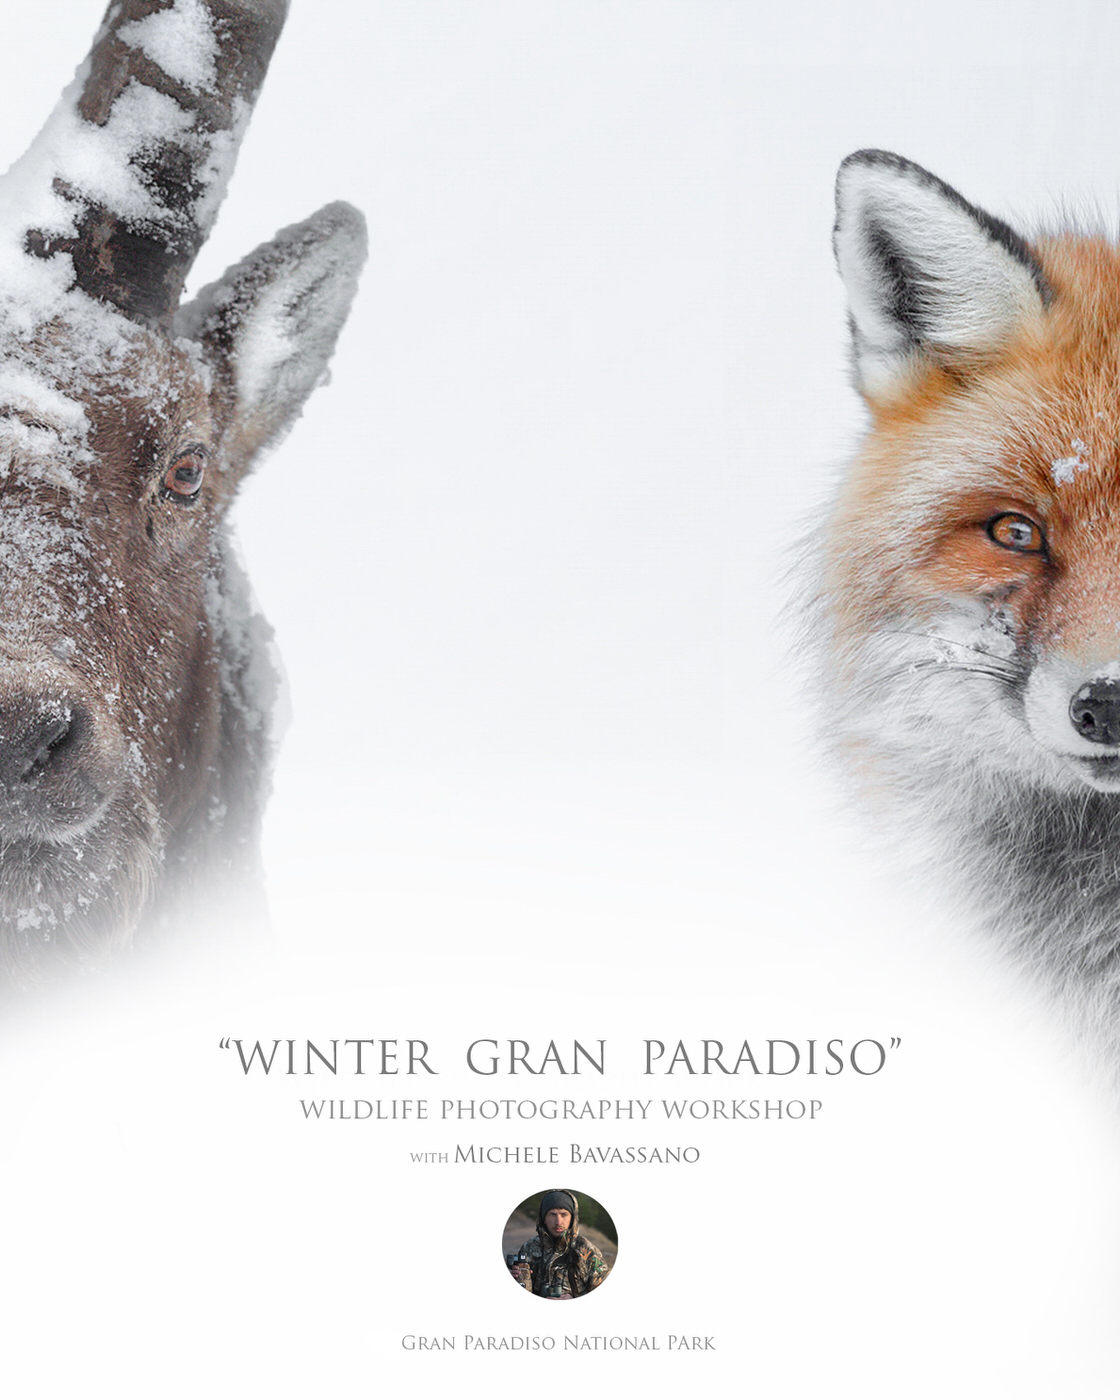 wildlife photography workshop in the Gran Paradiso National Park